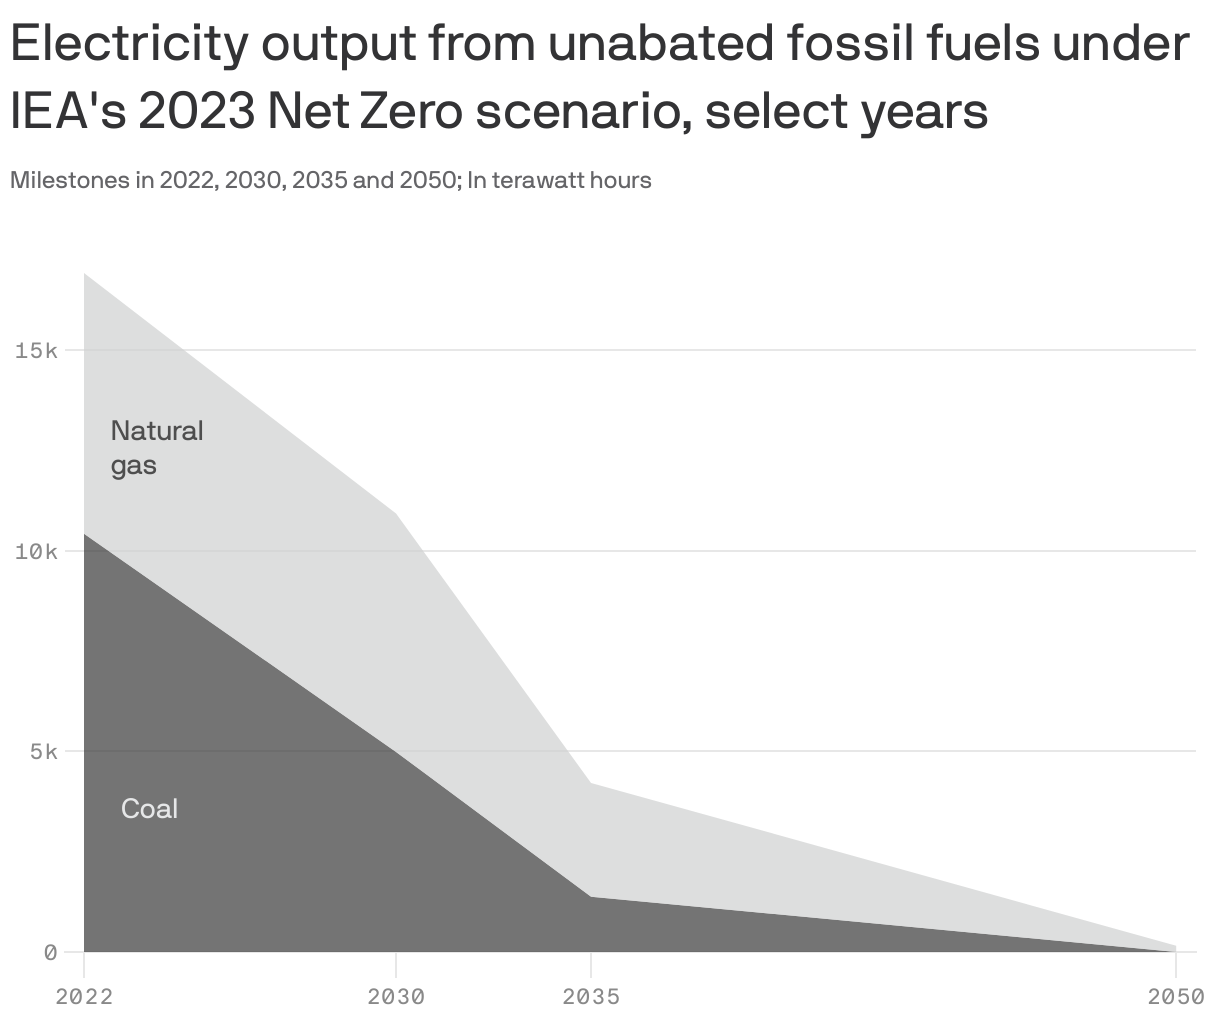 Electricity output from unabated fossil fuels under IEA's 2023 Net Zero scenario, select years